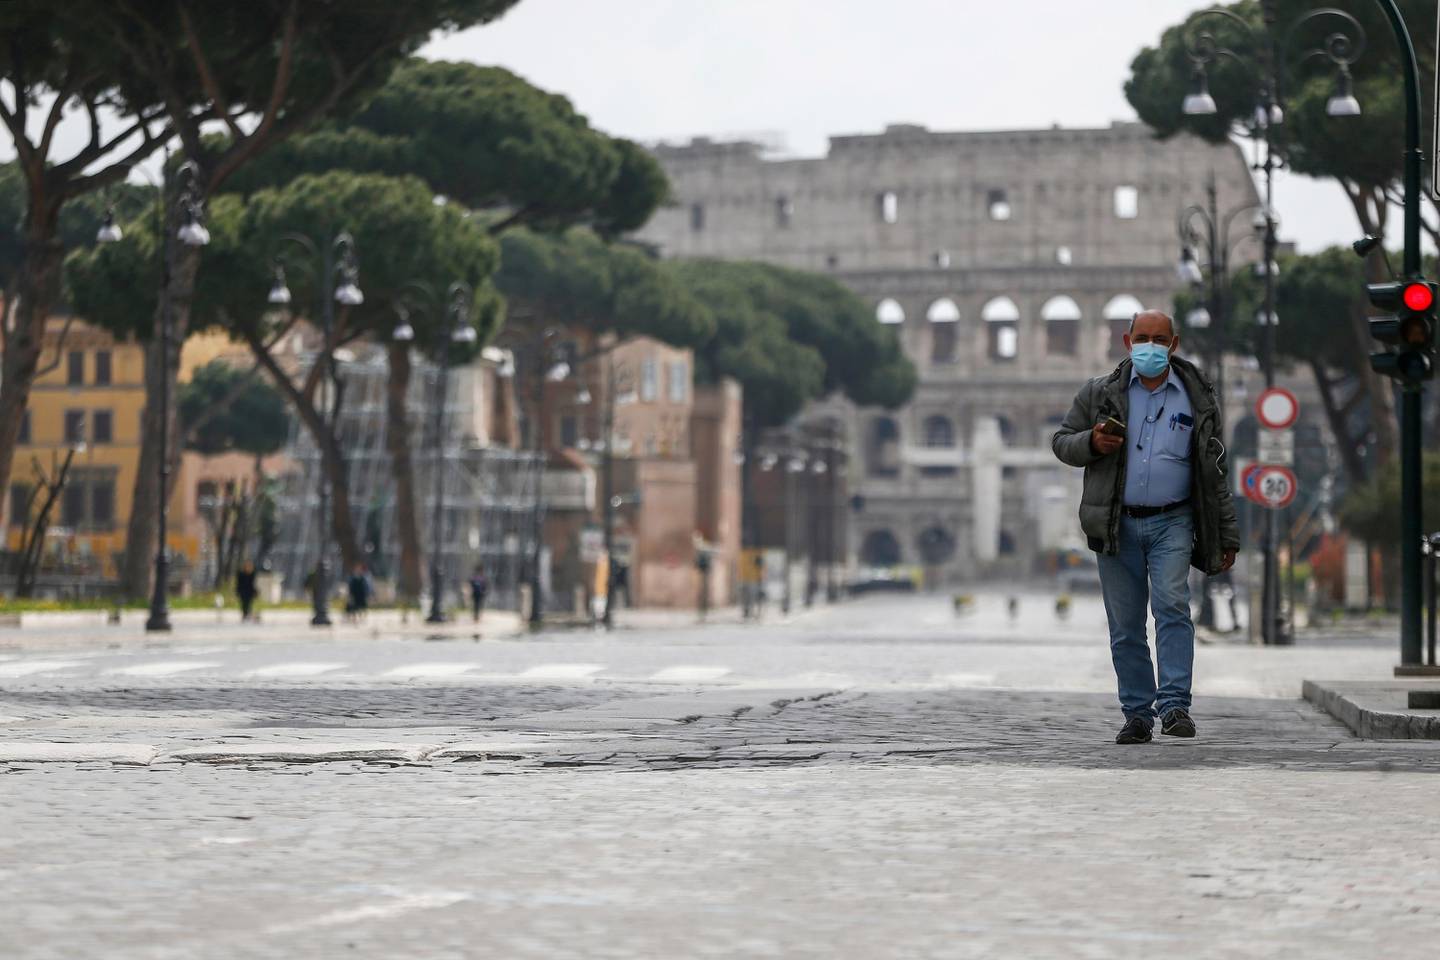 A man walks along an empty road following Italy's lockdown due to coronavirus emergency as the ancient Colosseum stands out in background, in Rome Sunday, March 29, 2020. The new coronavirus causes mild or moderate symptoms for most people, but for some, especially older adults and people with existing health problems, it can cause more severe illness or death. (Cecilia Fabiano/LaPresse via AP)